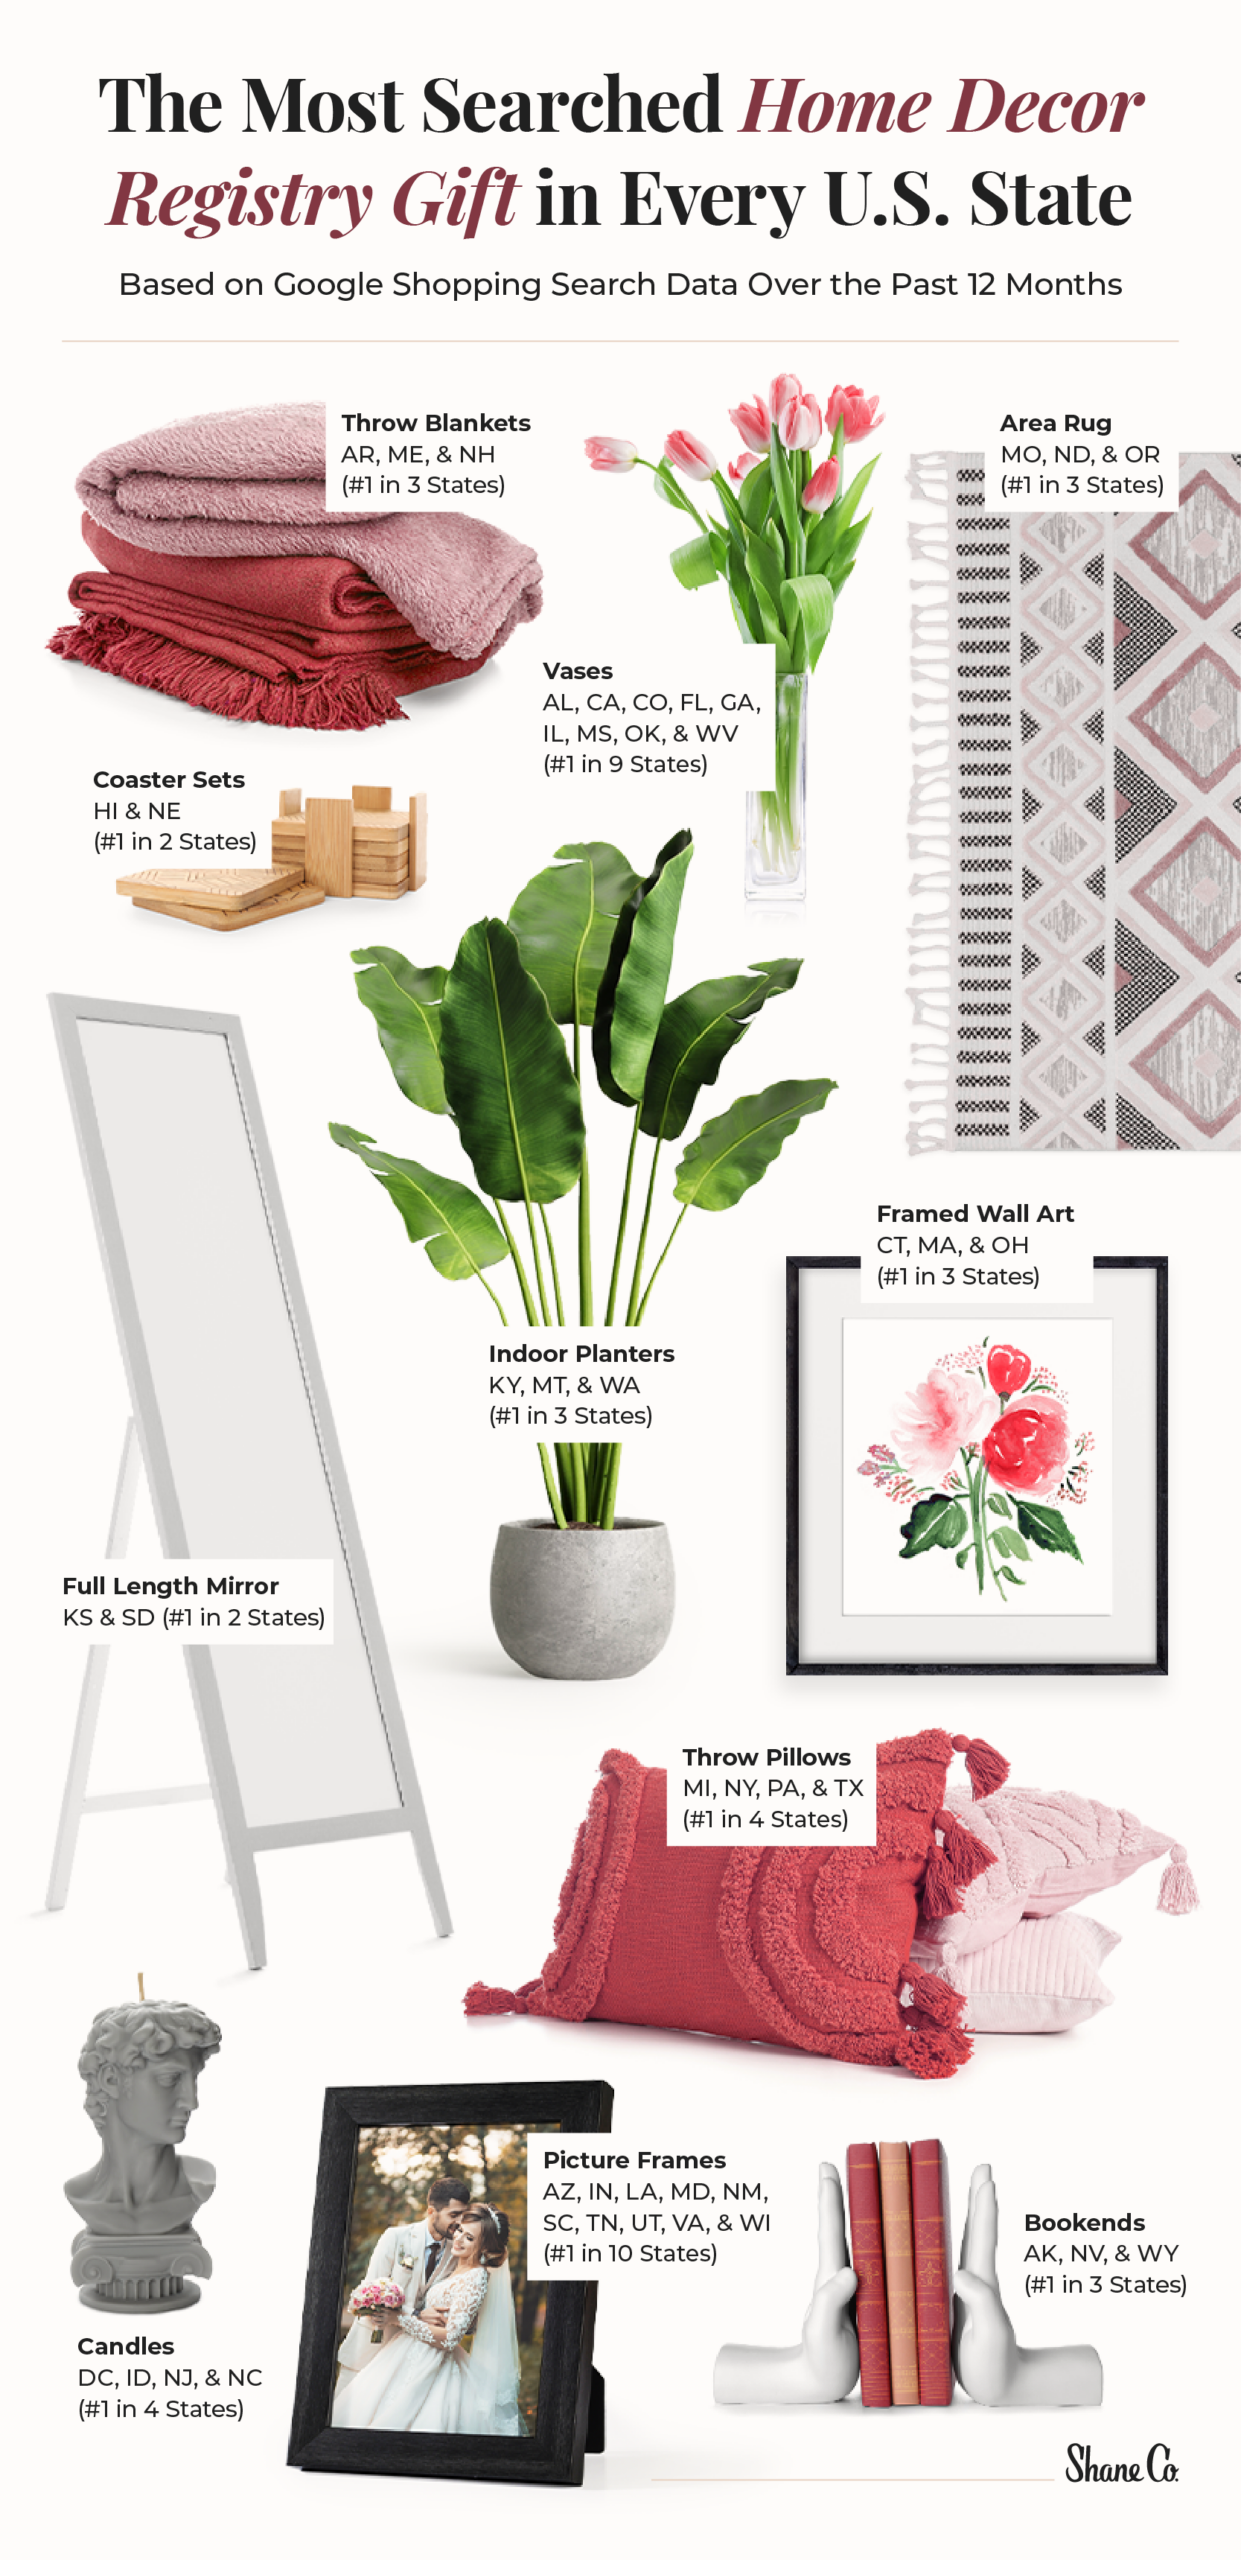 Infographic showcasing the most popular home decor wedding registry gifts in the U.S.